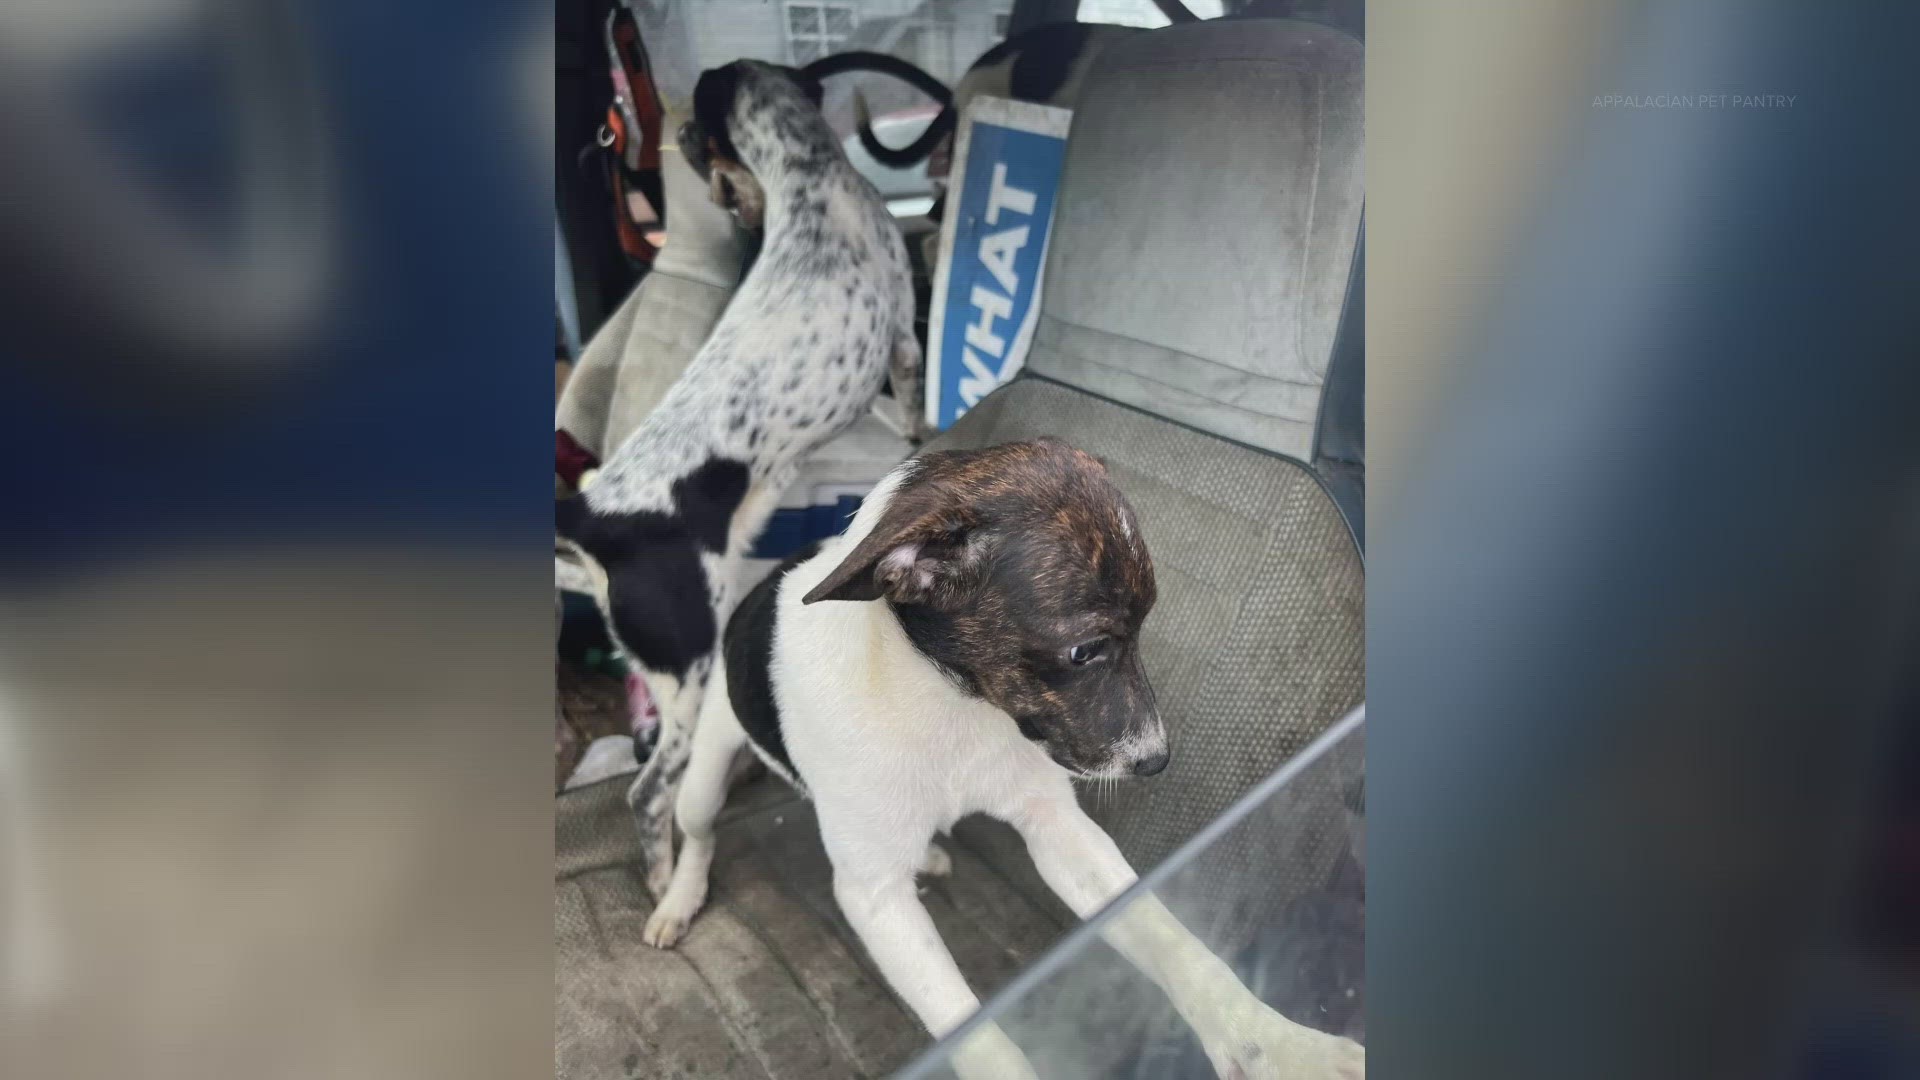 A man has been arrested in eastern Kentucky after police found more than 30 dogs living with him in a van.